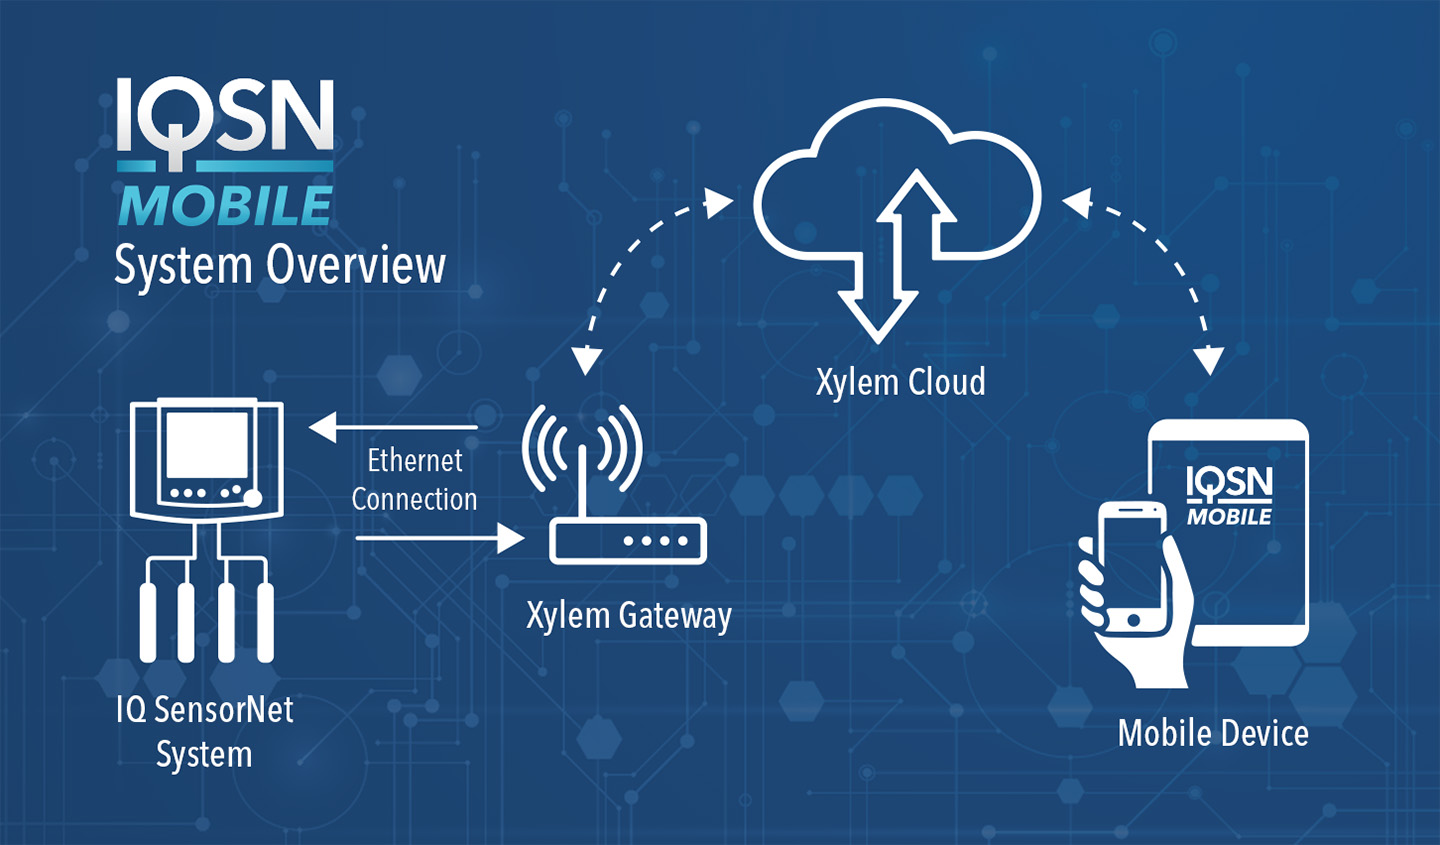 YSI IQSN Mobile System Overview - Learn More